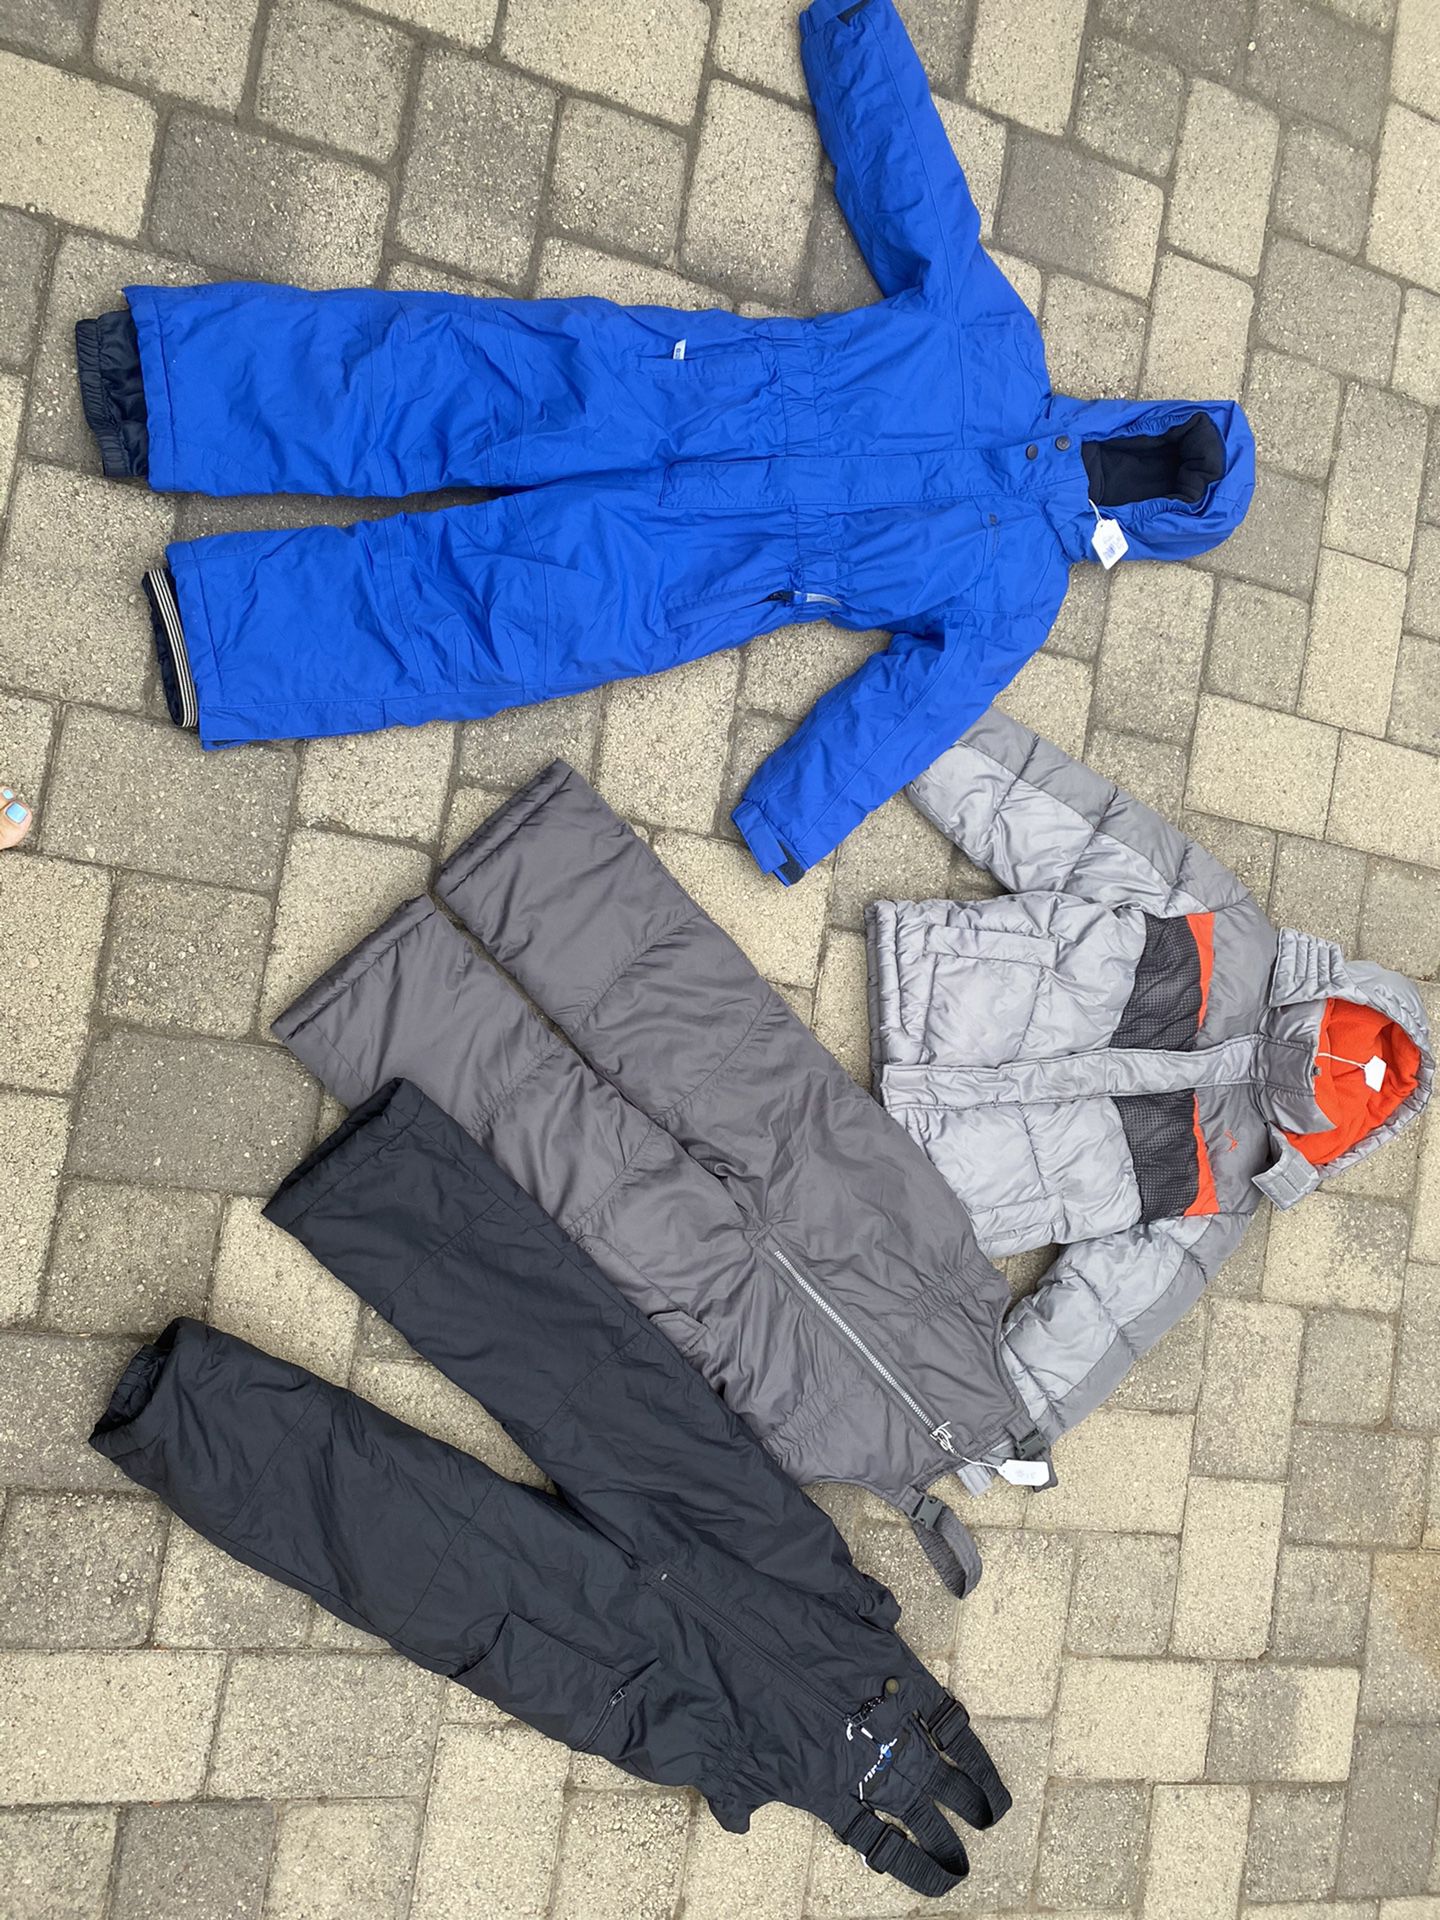 3 items of ski clothes